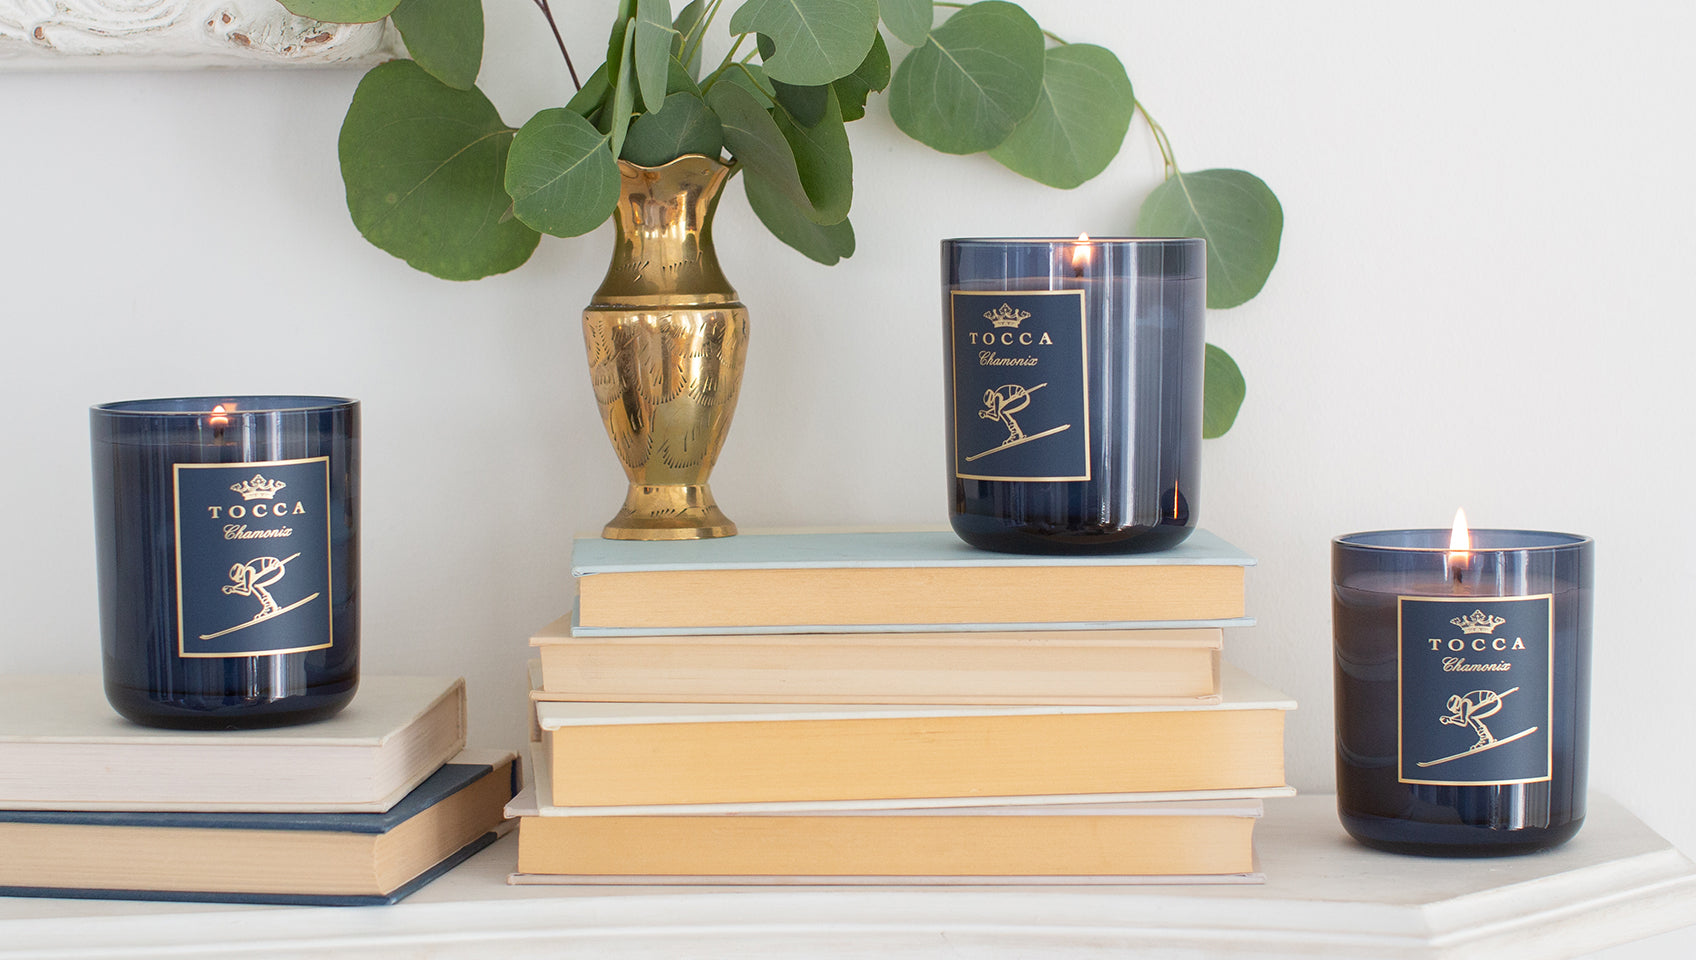 Candela Classica products on books with plant